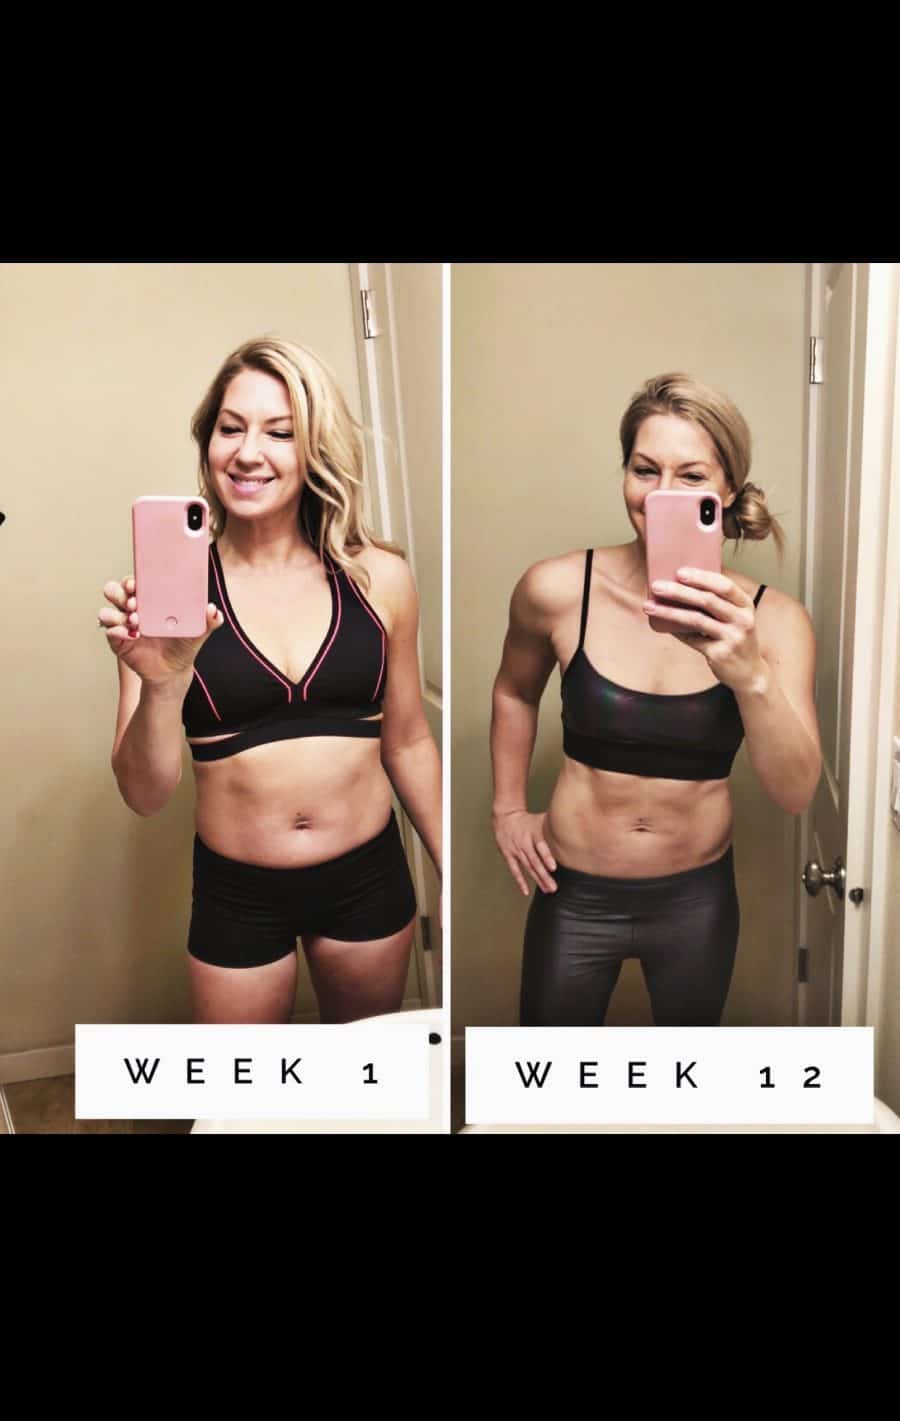 Week Twelve Review Of 80 Day Obsession, 80 day obsession, 80 day obsession review, 80 day obsession fit mom, Fit mom 80 day obsession, Best 80 day obsession transformation, 80 day obsession transformation, 80 day obsession mom, 80 day obsession moms, Review of 80 day obsession, Lose weight with 80 day obsession, How 80 day obsession works